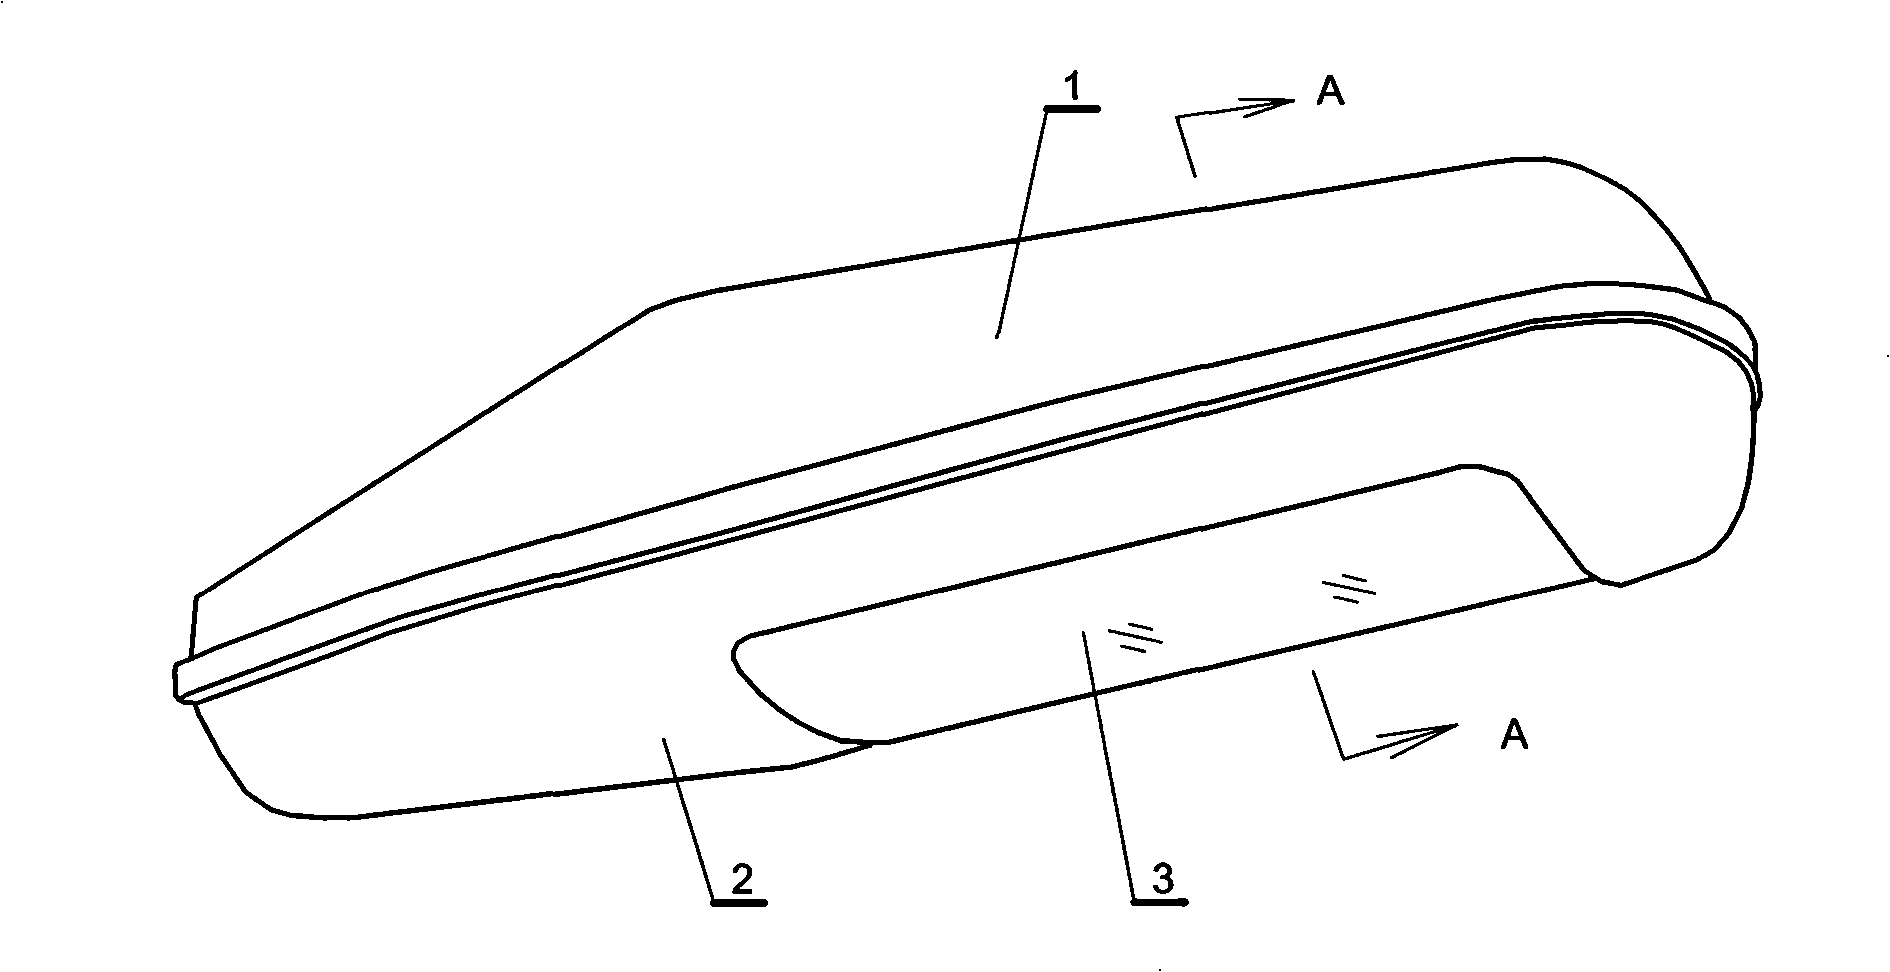 Street light fitting with luminous diode heat radiating device